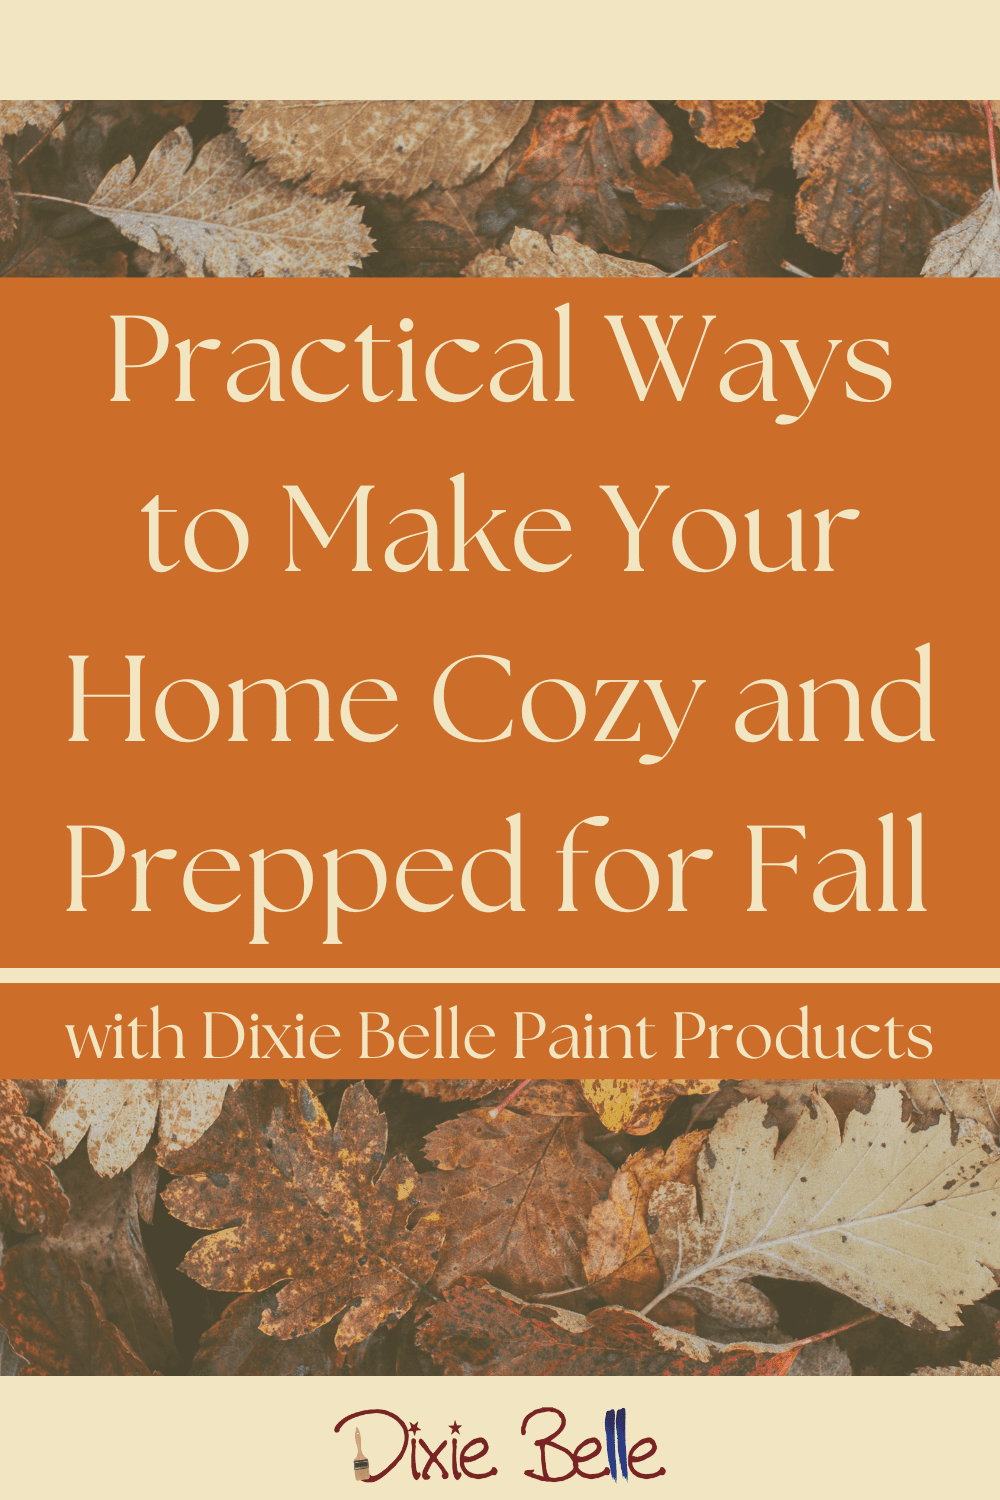 Dixie Belle Paint Company - Here's a helpful guide for how to use